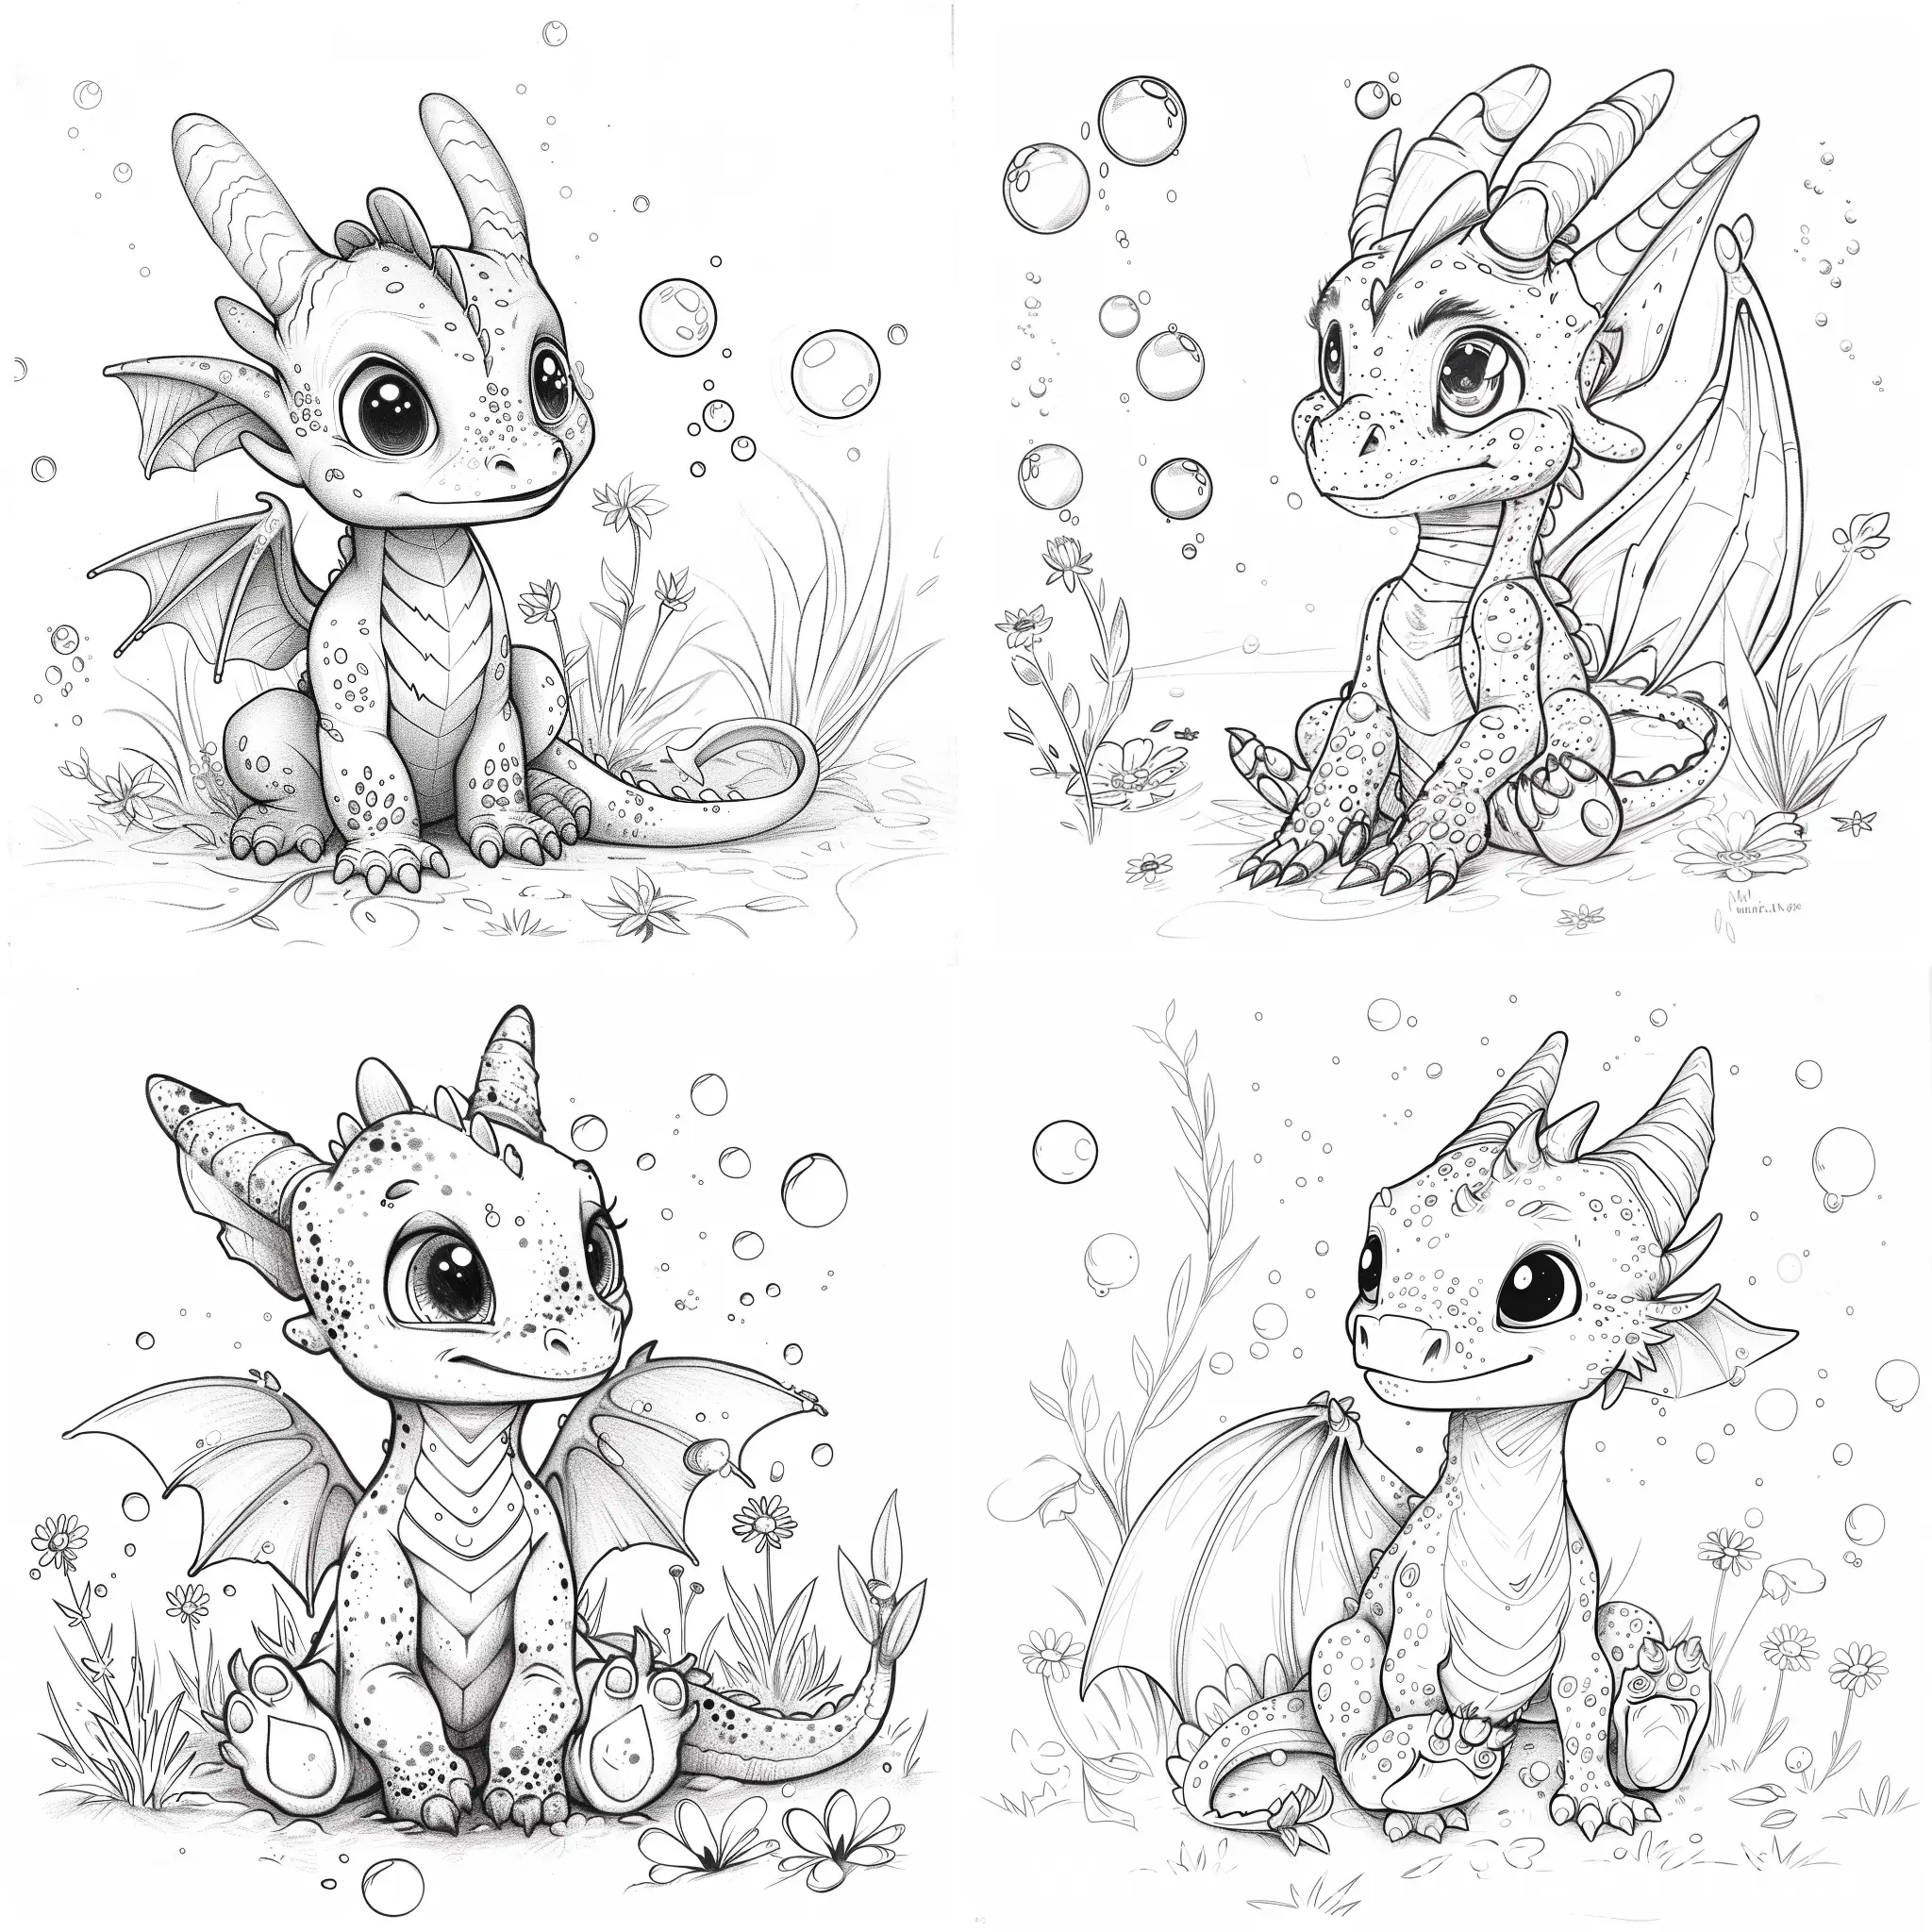 A cute and friendly little dragon is sitting on the floor, admiring the bubbles floating around him.  He has large, bright eyes, delicate little horns, and speckled skin.  His wings are rounded and his ears are pointed.  He seems happy and curious.  Around him, there are flowers and grass growing from the ground.  The drawing is in black and white without shading, perfect for coloring.